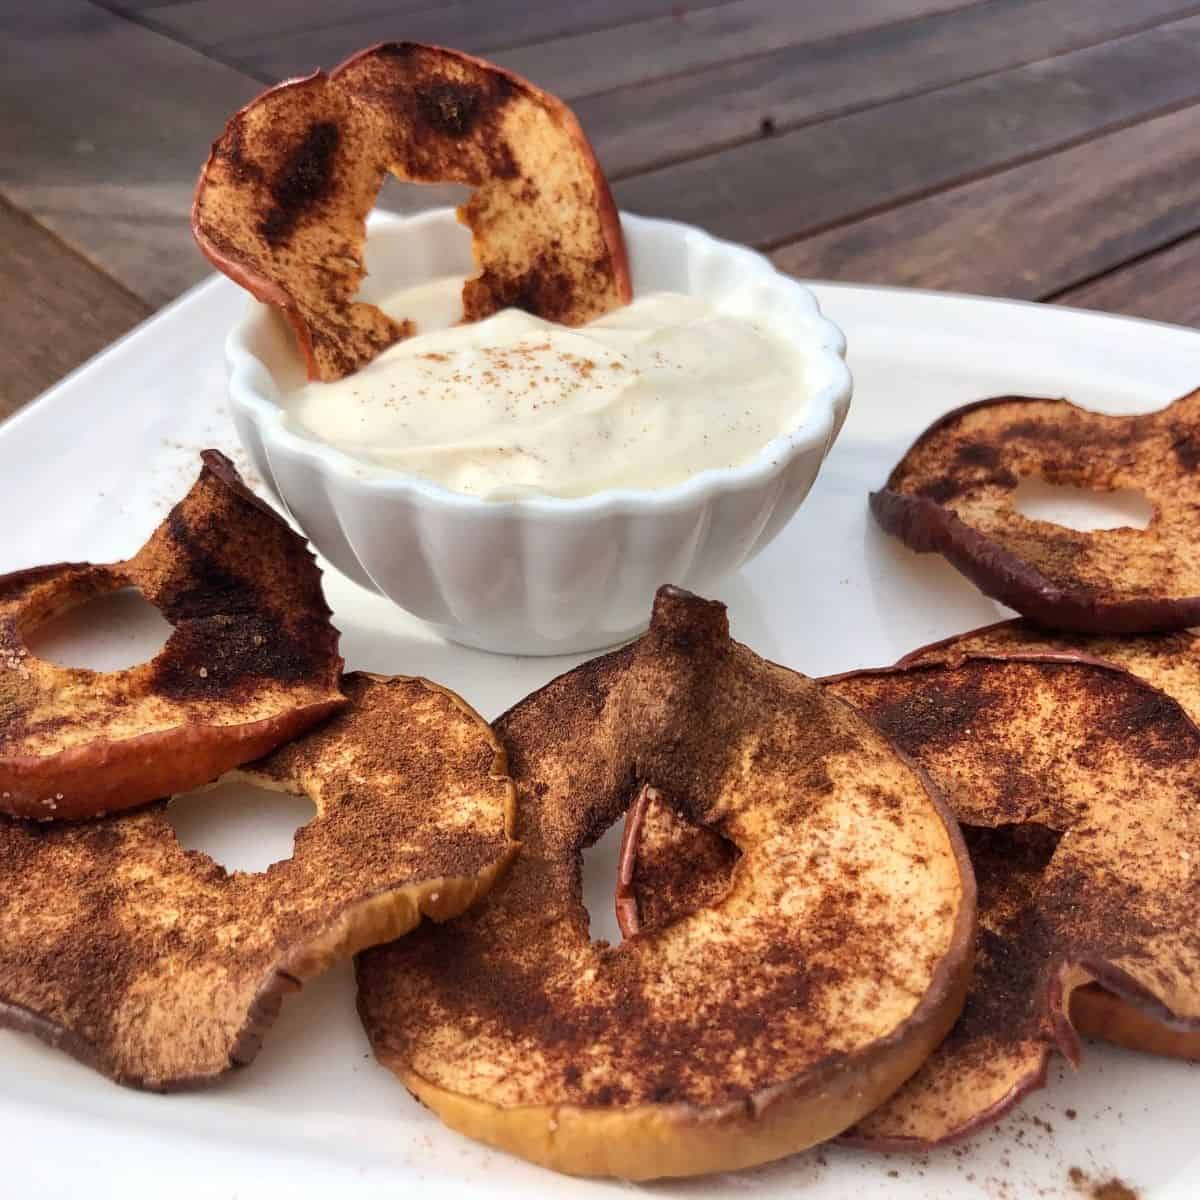 Apple chips on a white plate and an apple chip being dipped in a cream cheese dip in a small white bowl sitting on the plate on a wooden table